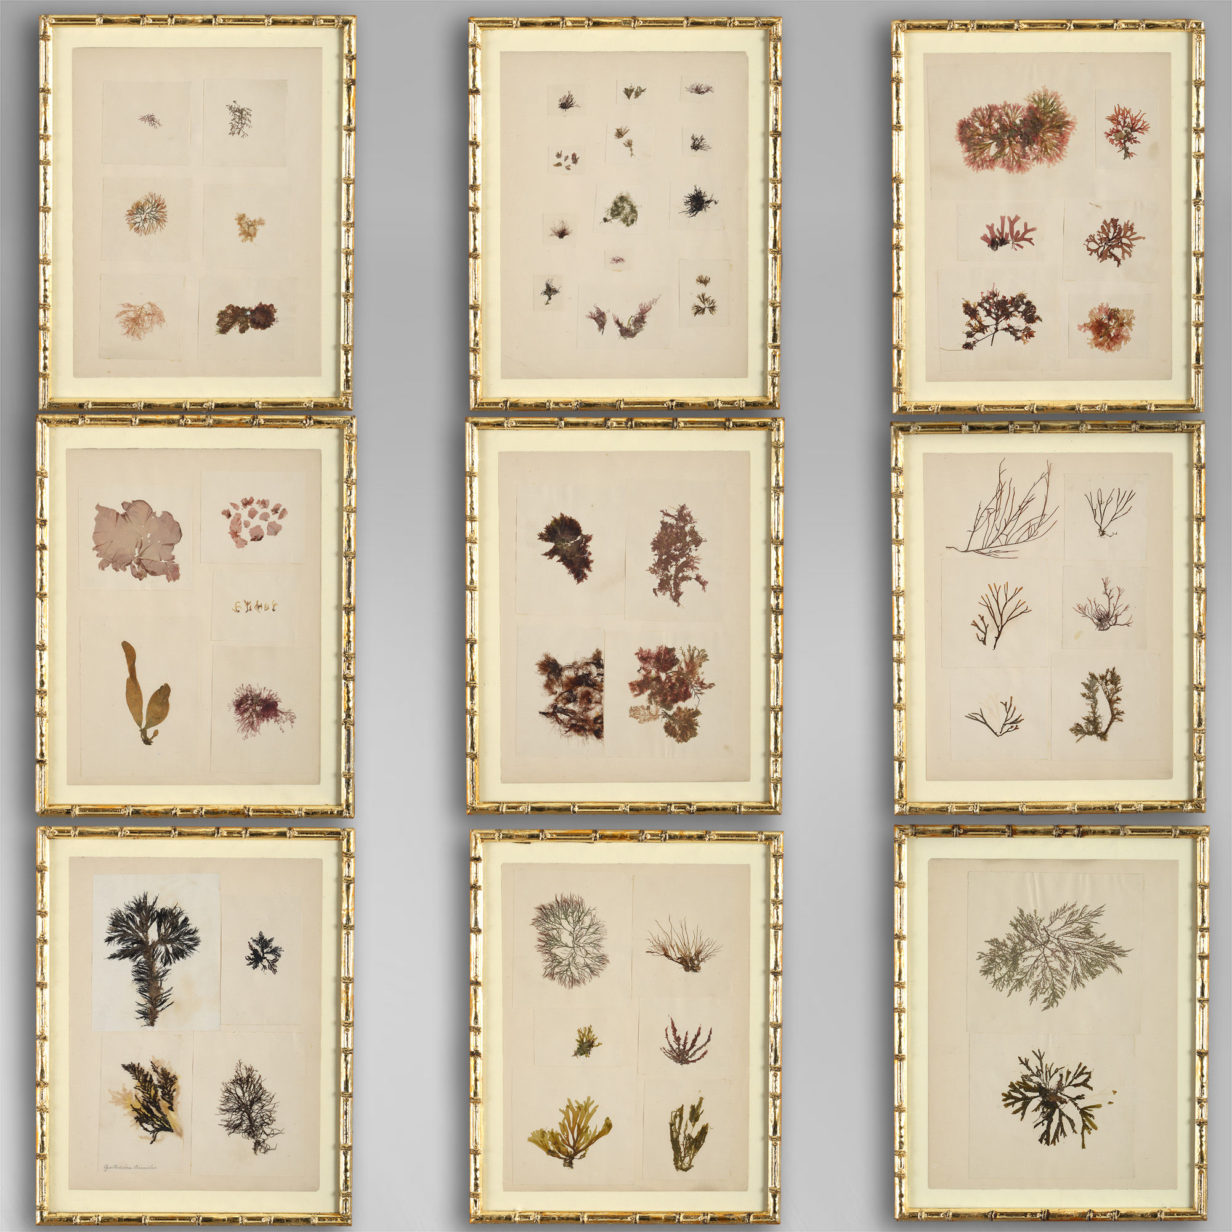 A collection of nine 19th century seaweed presses